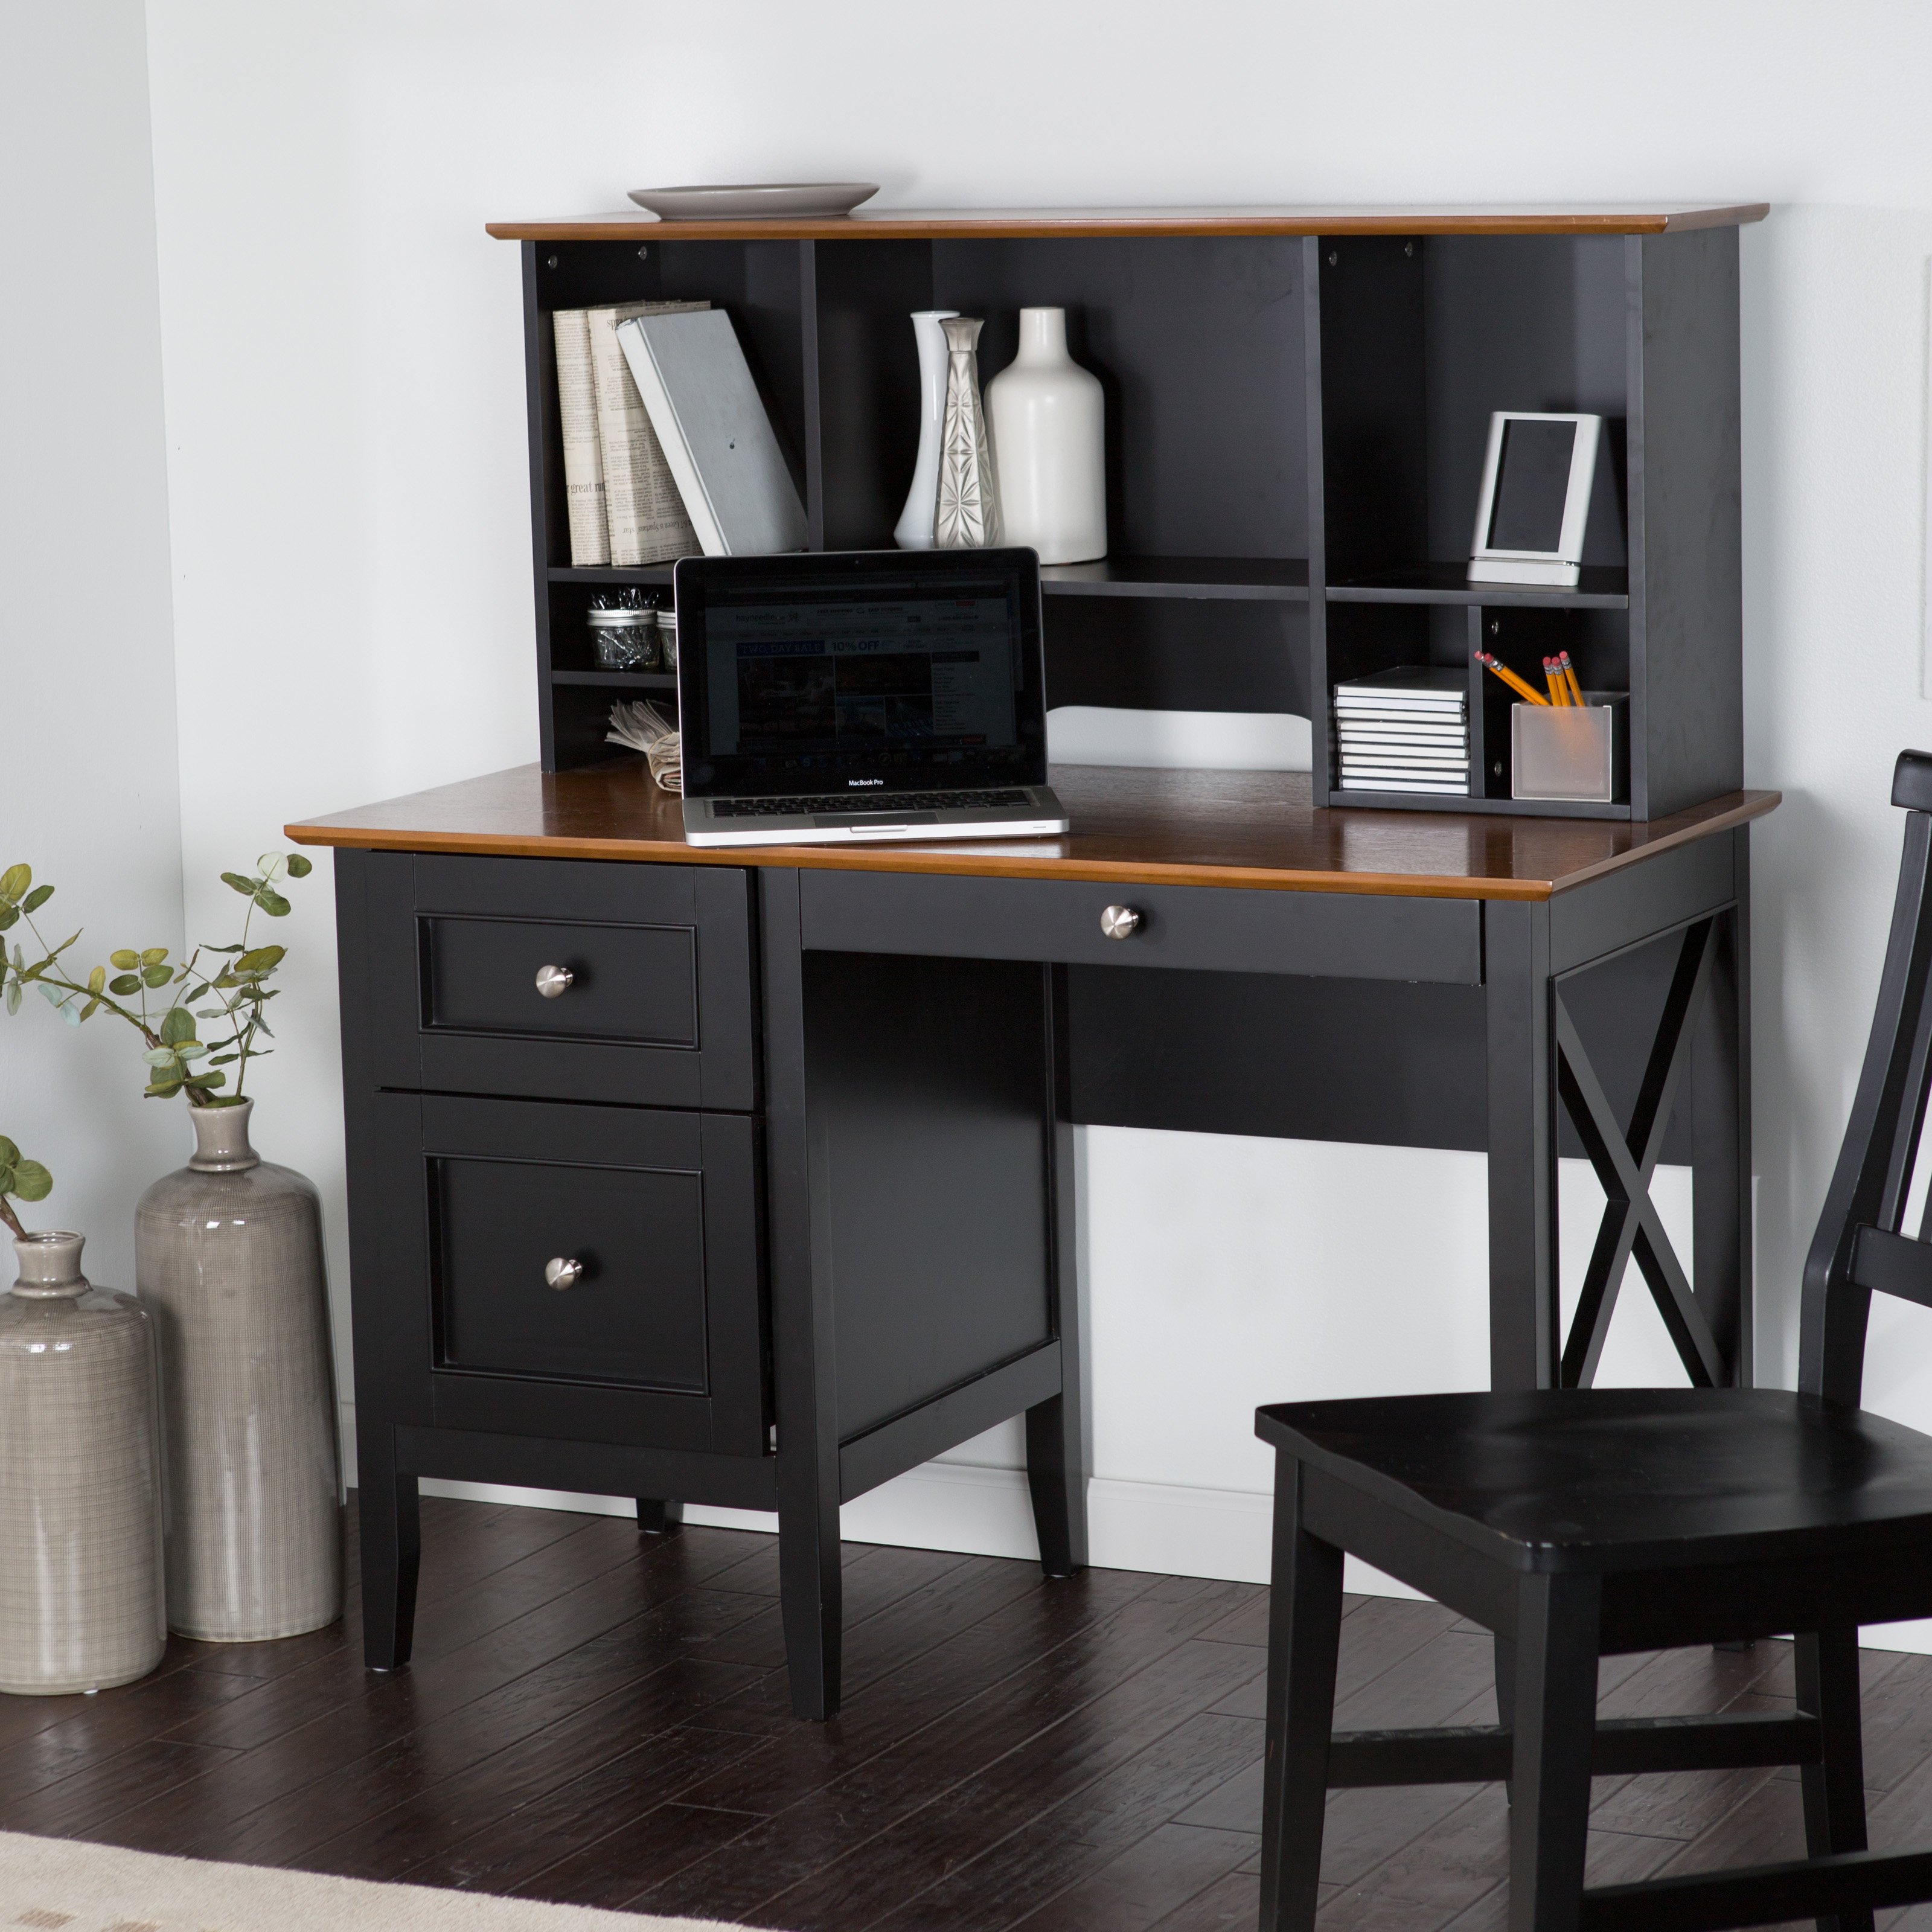 black wooden desk with shelf and drawers also brown wooden top plus ...